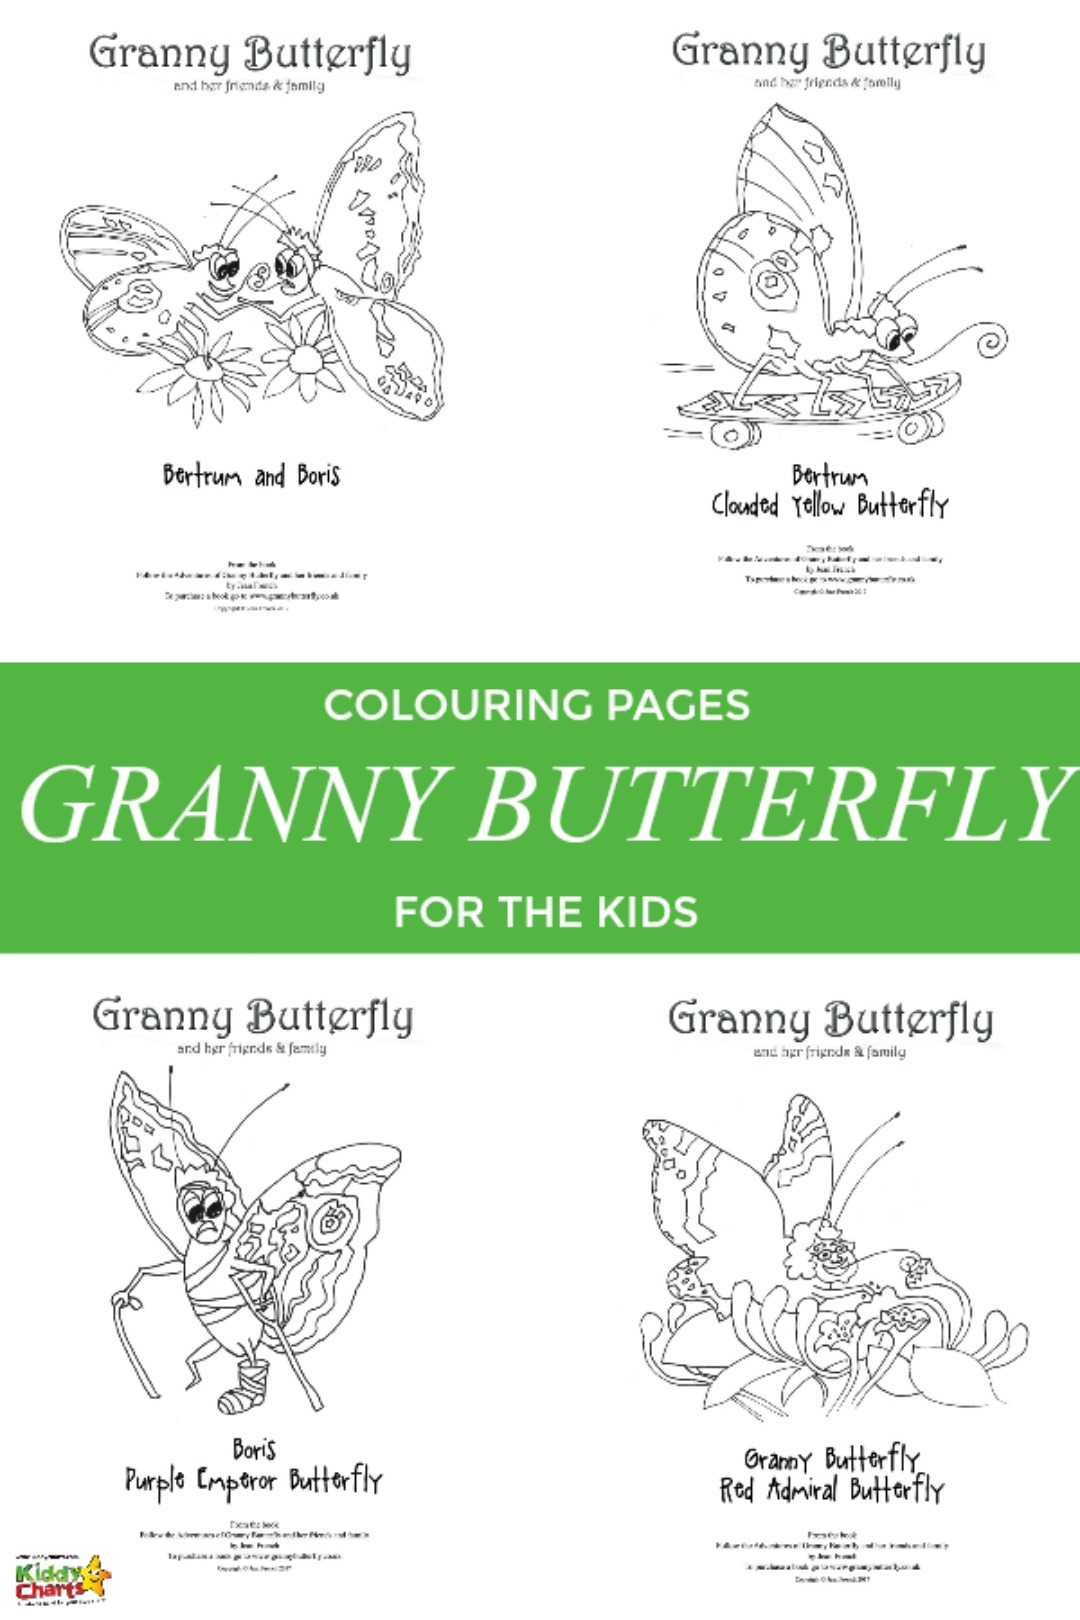 Granny Butterfly colouring pages to use while you read the book with your kids! #reading #butterflies #coloring #colouring